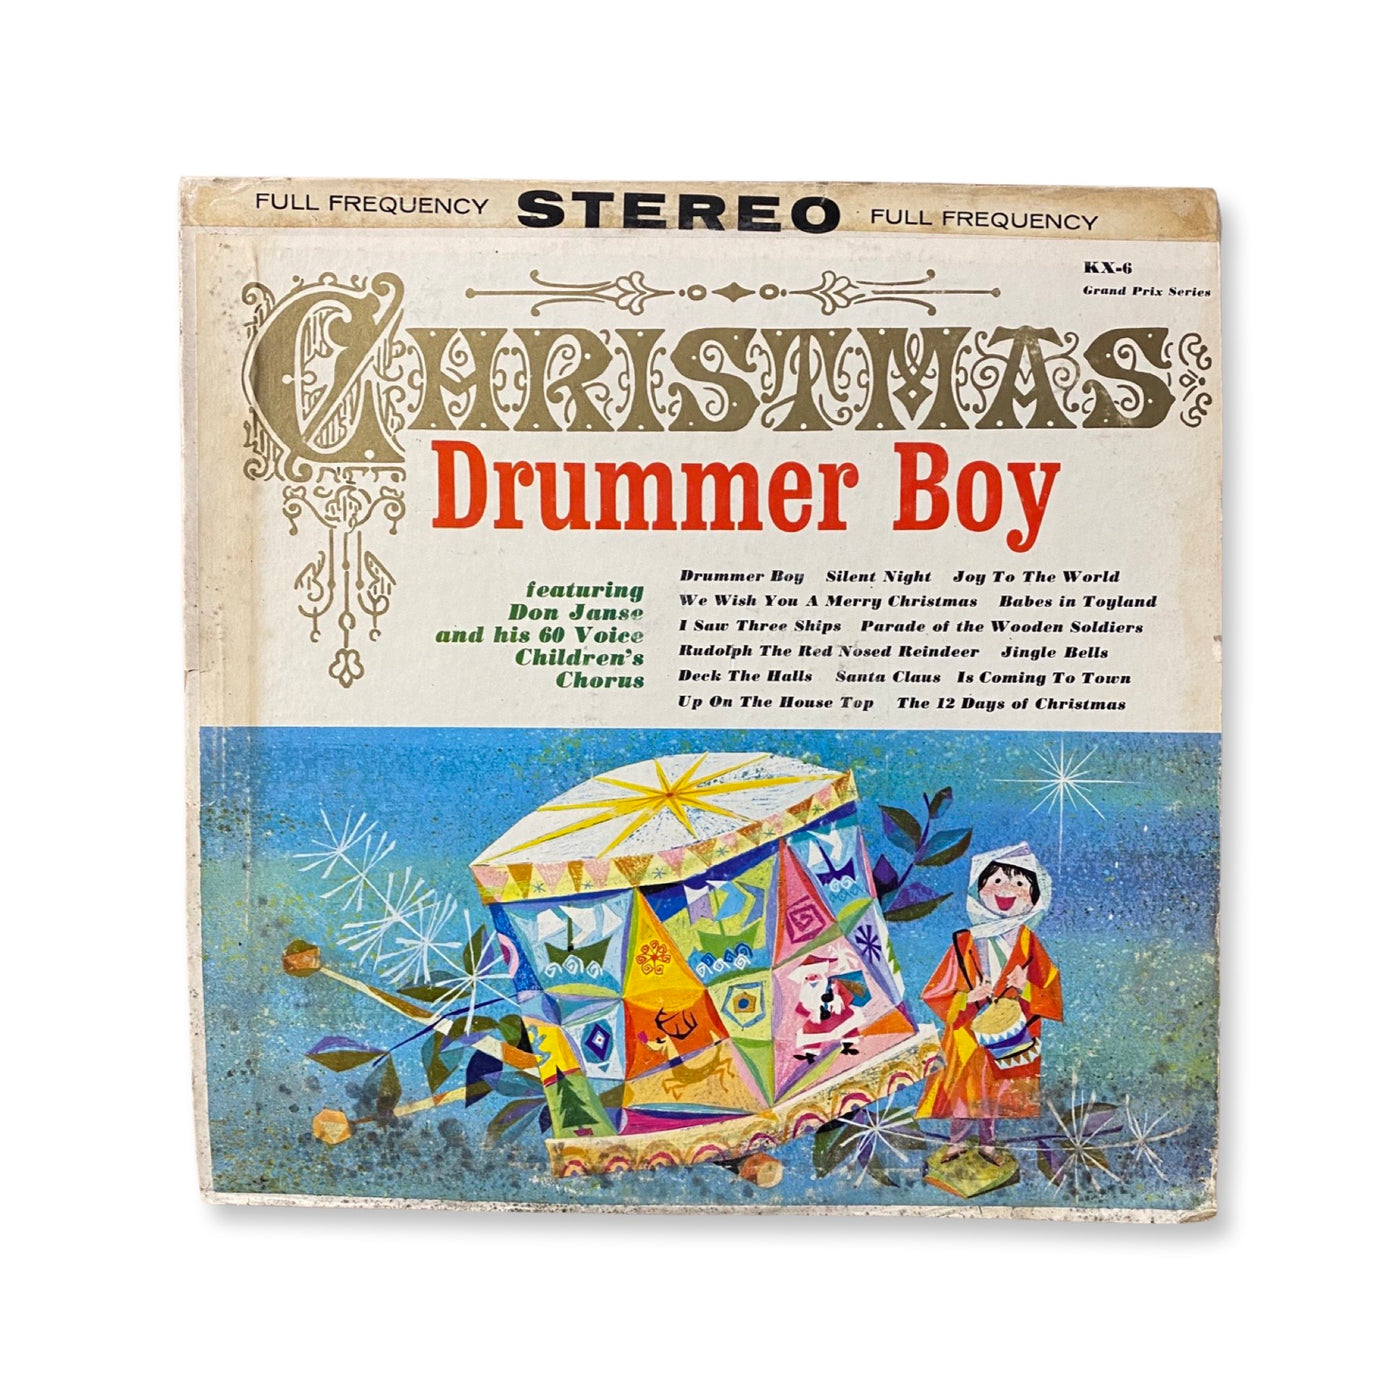 Don Janse And His 60 Voice Children's Chorus - The Christmas Drummer Boy